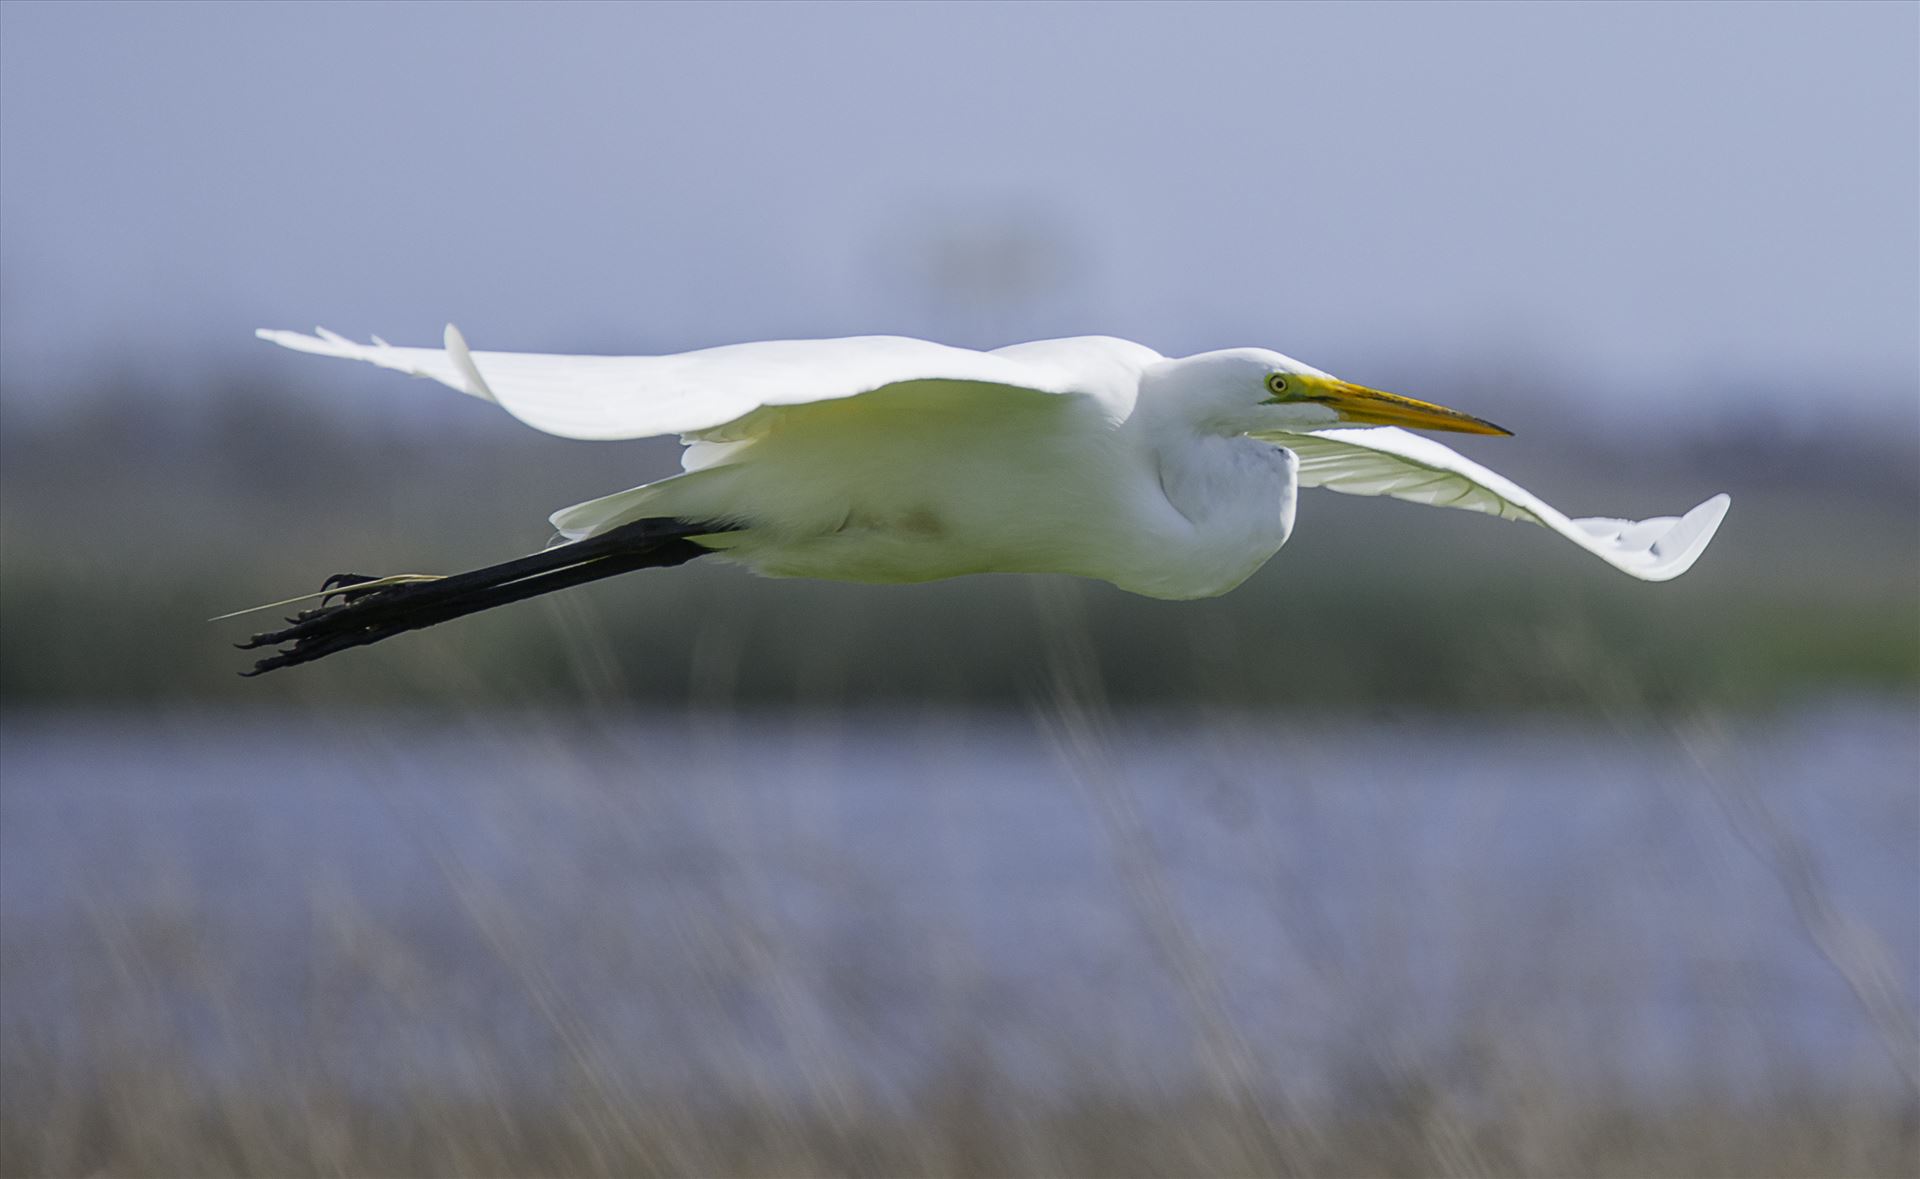 Great Egret in Flight - A great egret flies over the Yolo Bypass Nature Preserve in California by Denise Buckley Crawford